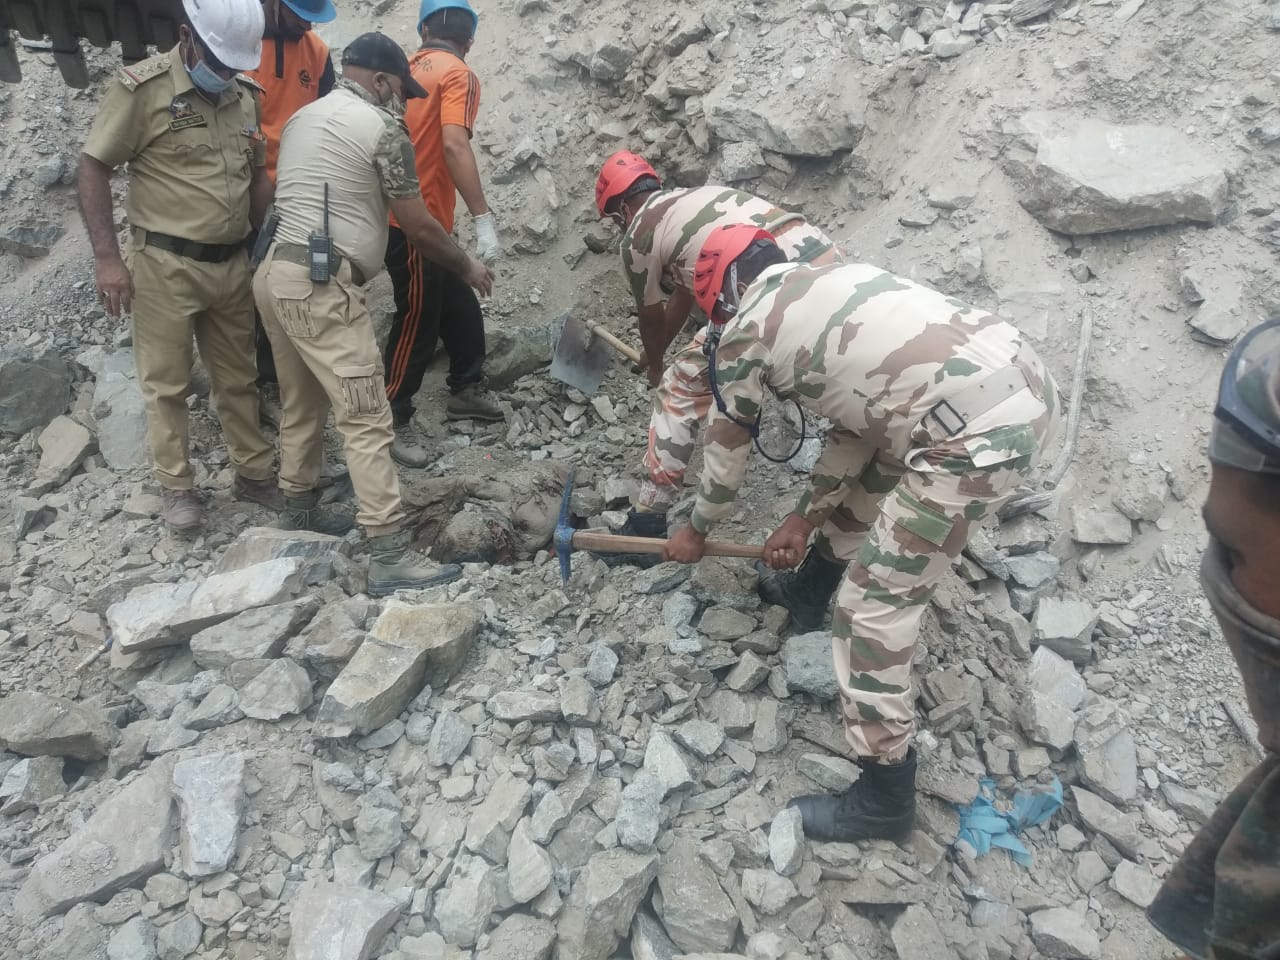 J&K tunnel accident: All 10 bodies recovered; FIR against construction company